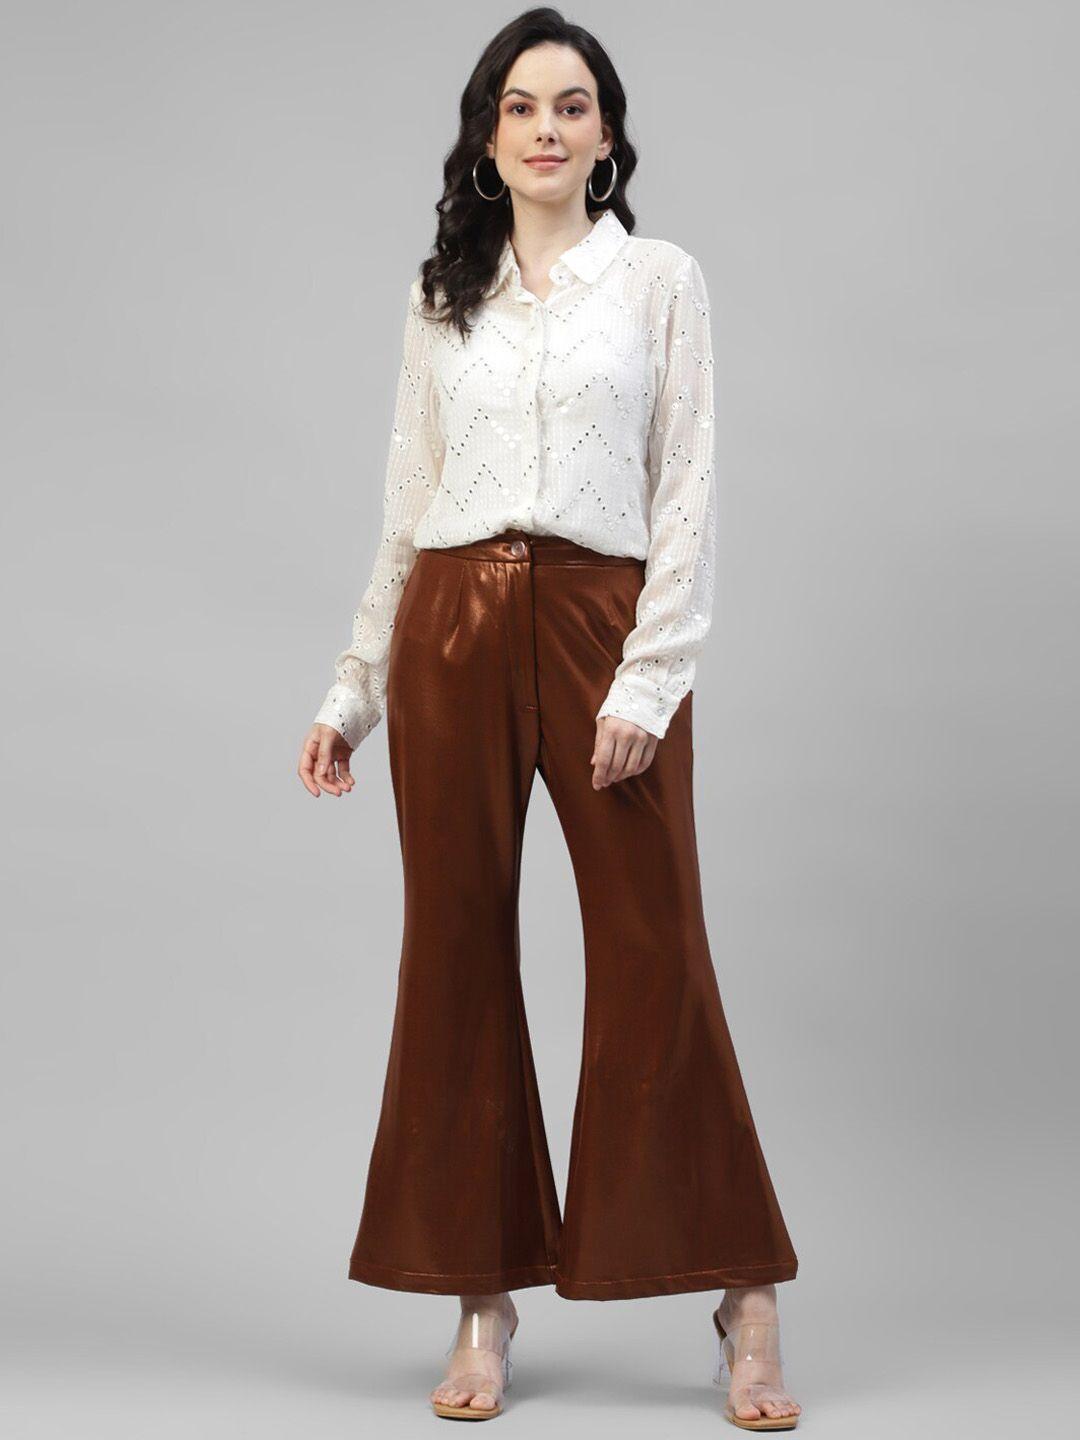 deebaco embroidered shirt with bell bottom pants co-ords